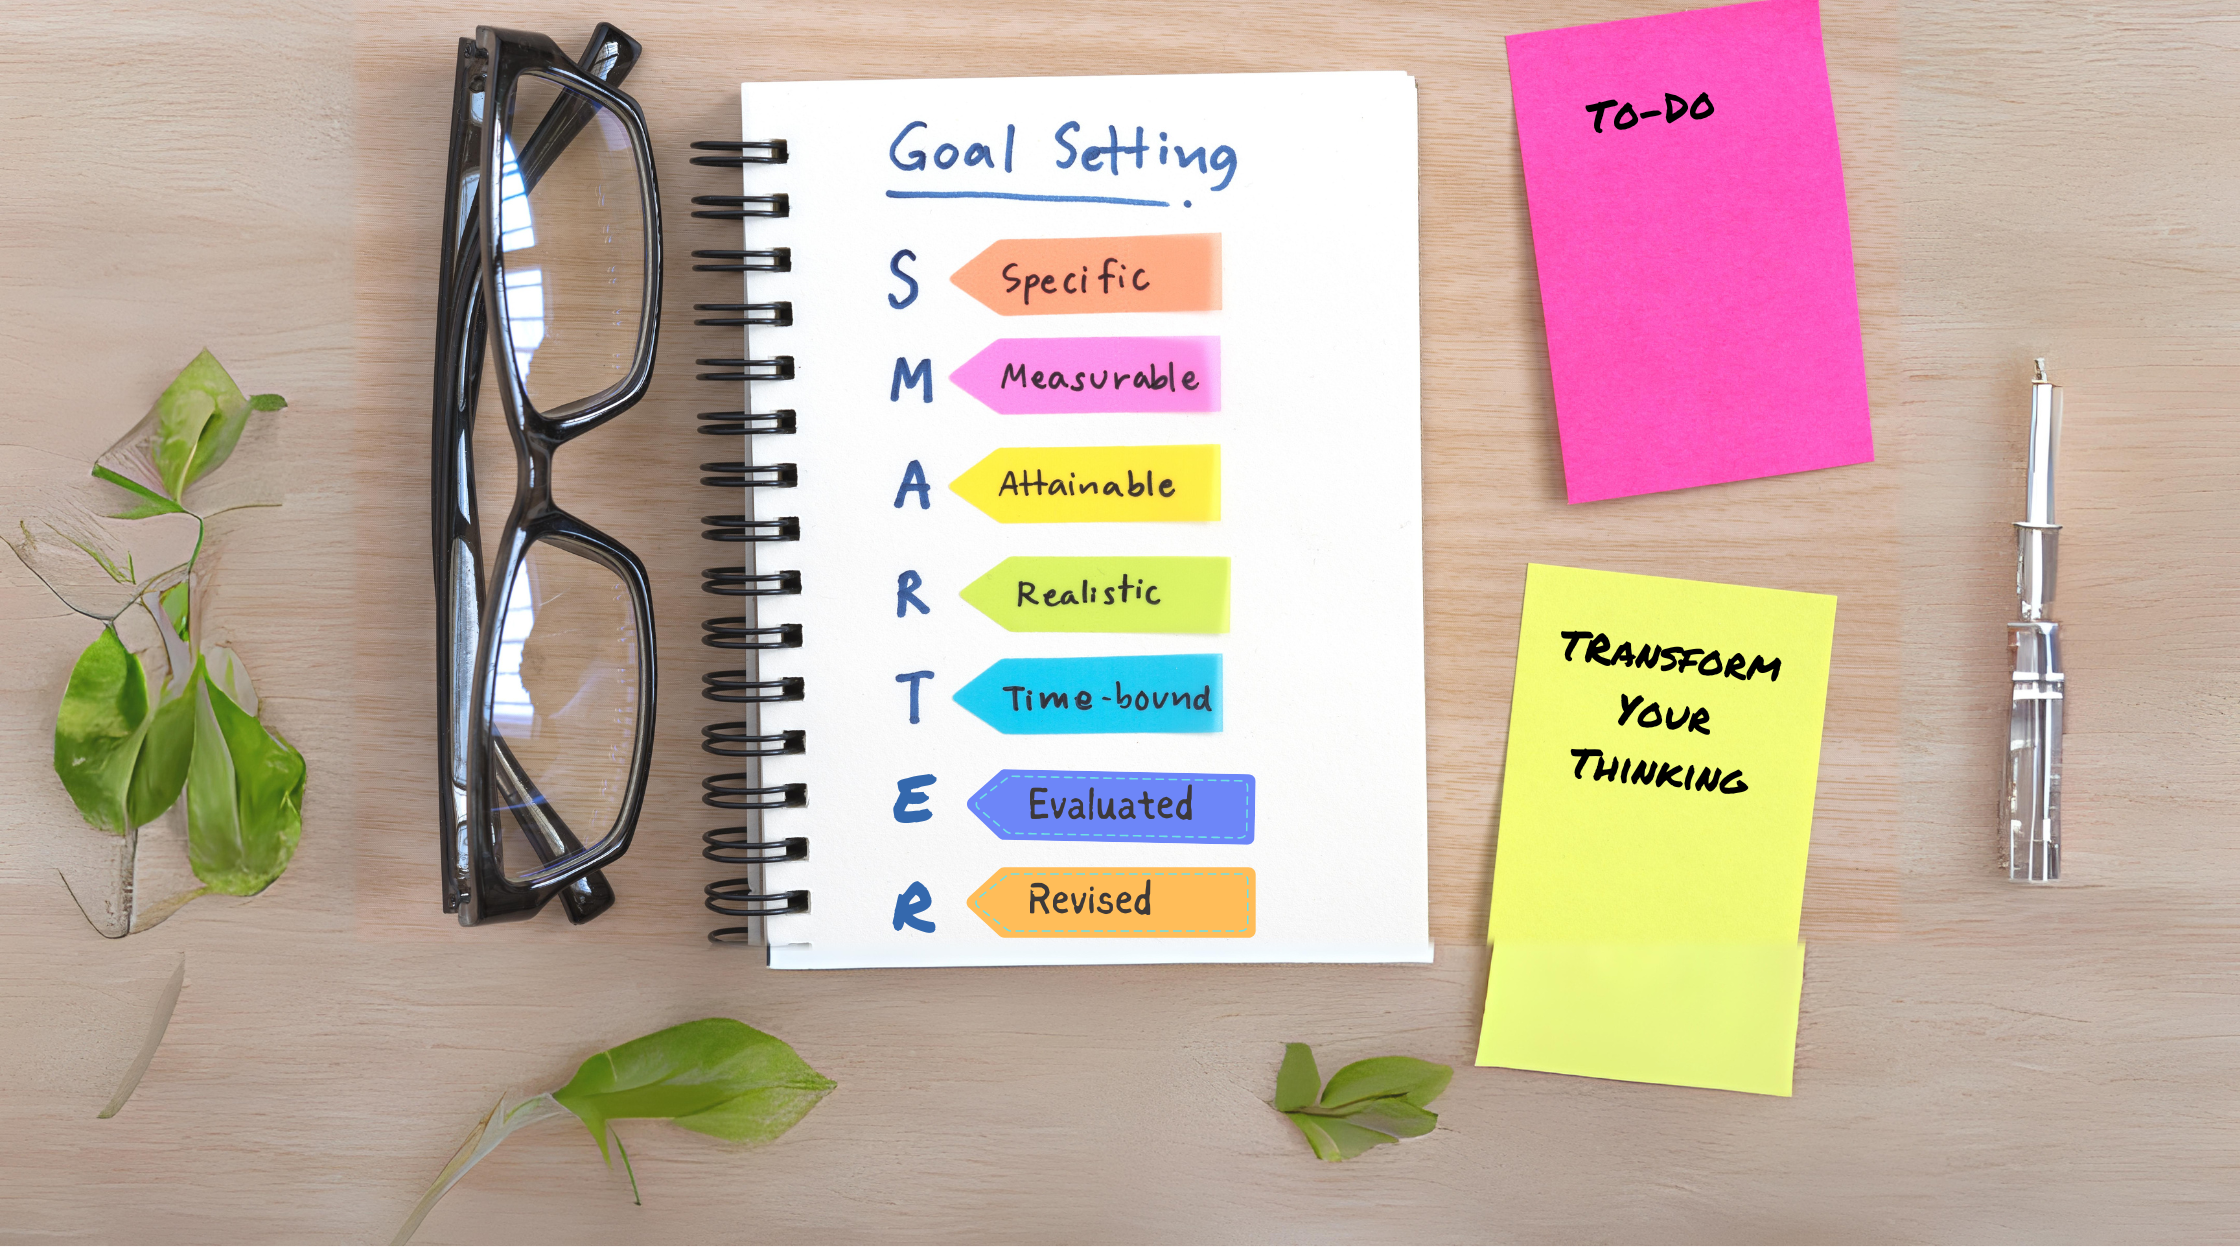 S.M.A.R.T.E.R. Goal Setting and How it Can Help Your Business.